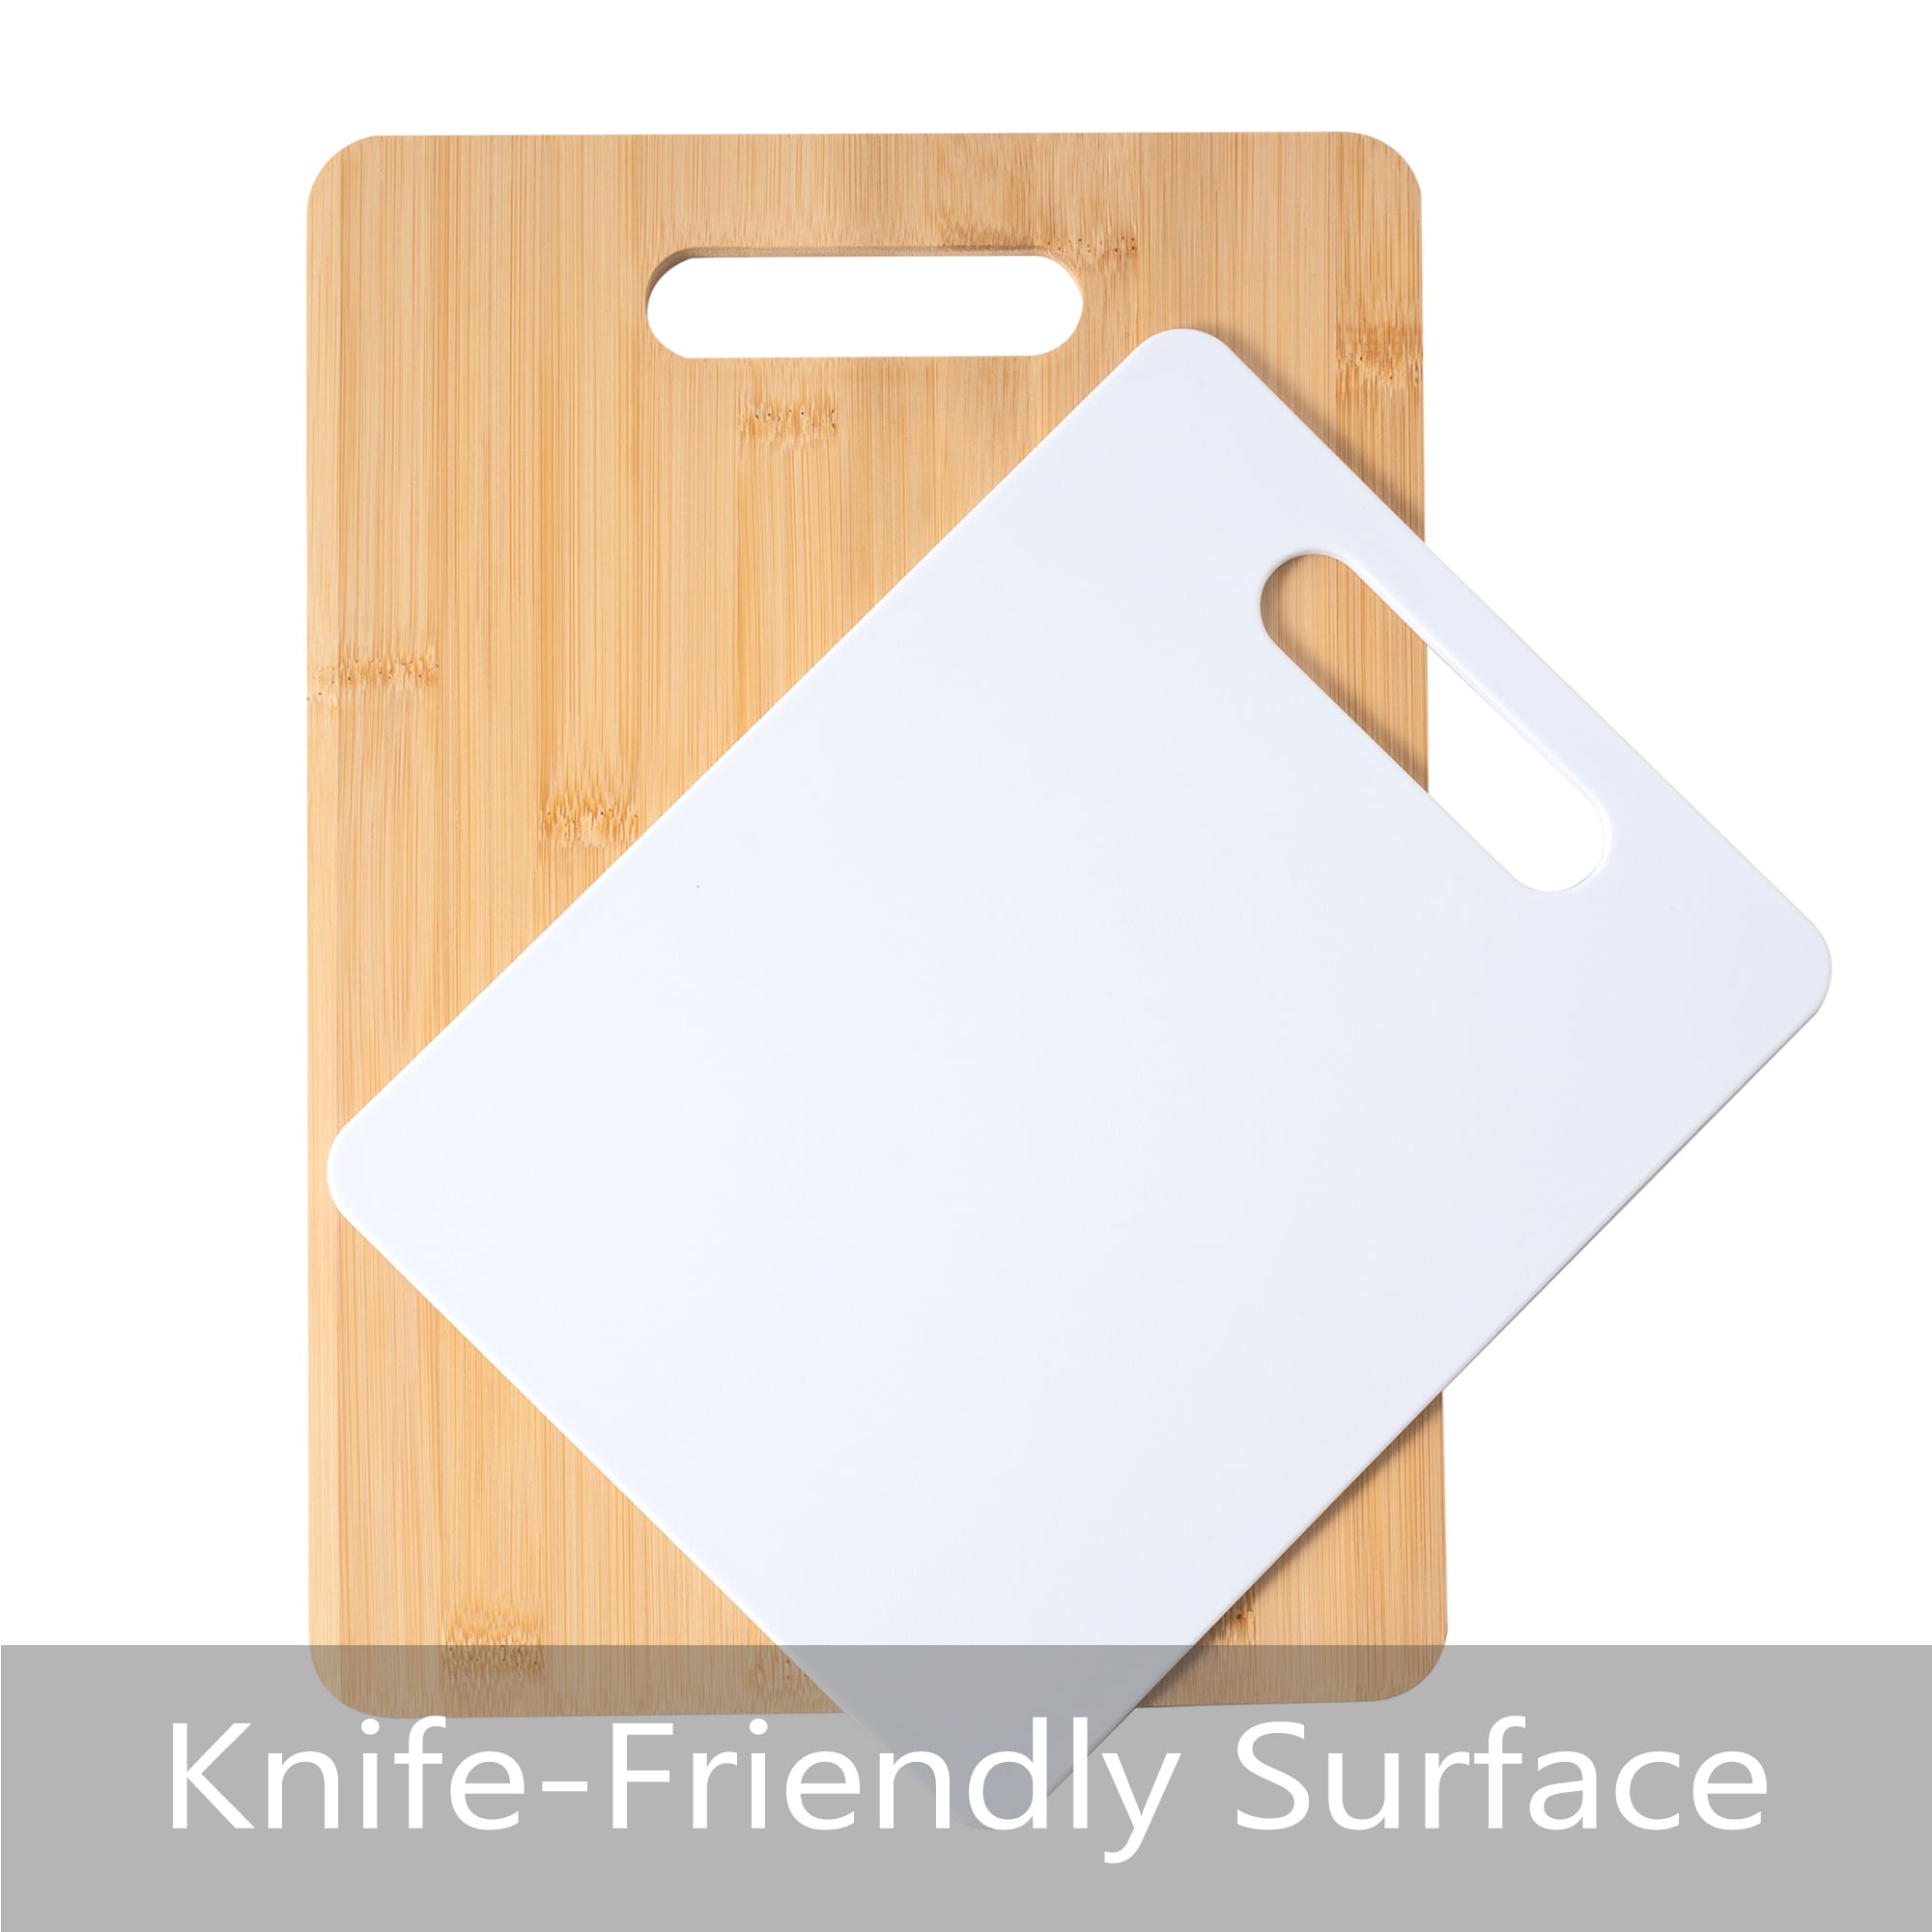 Mainstays Pineapple Cutting Board made of Polypropylene Yellow 